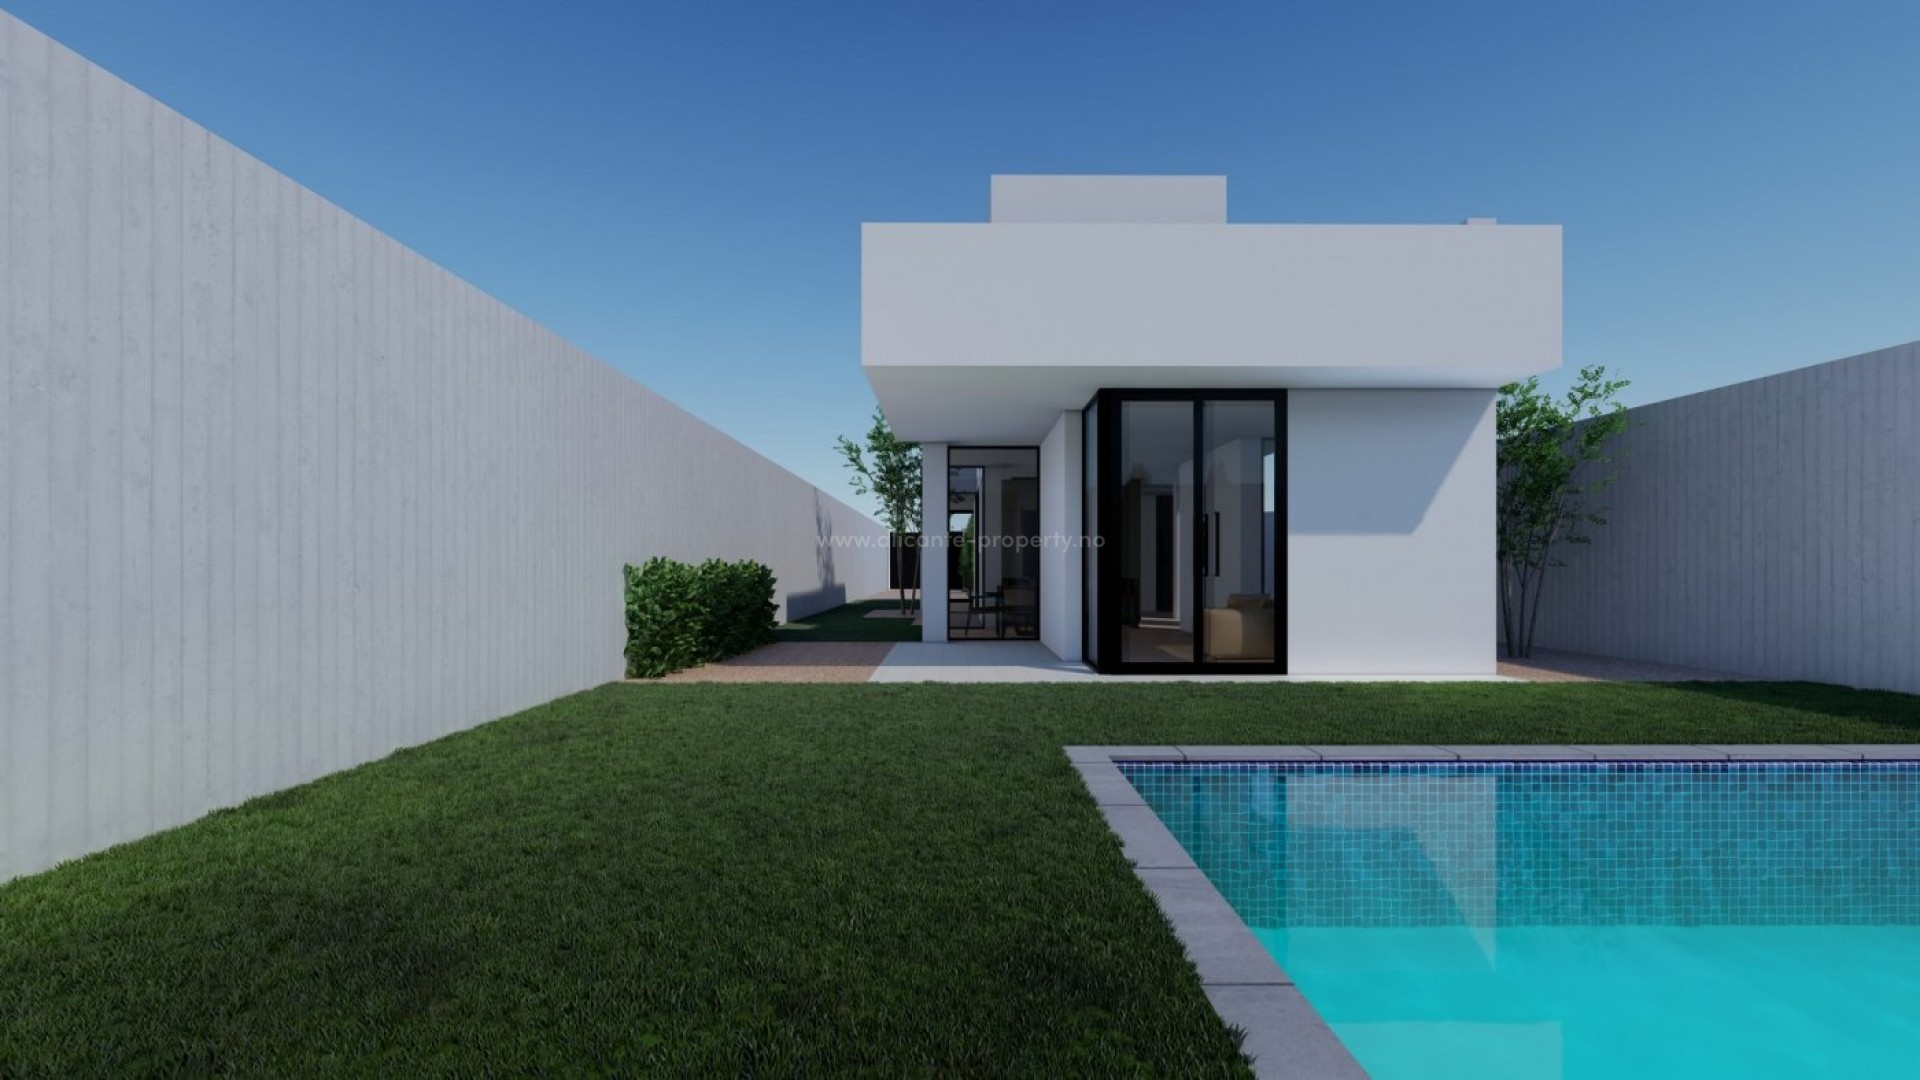 Brand new houses/villas in Polop, Alicante, 3 bedrooms and 2 bathrooms, private pool, garden and plot with own parking space